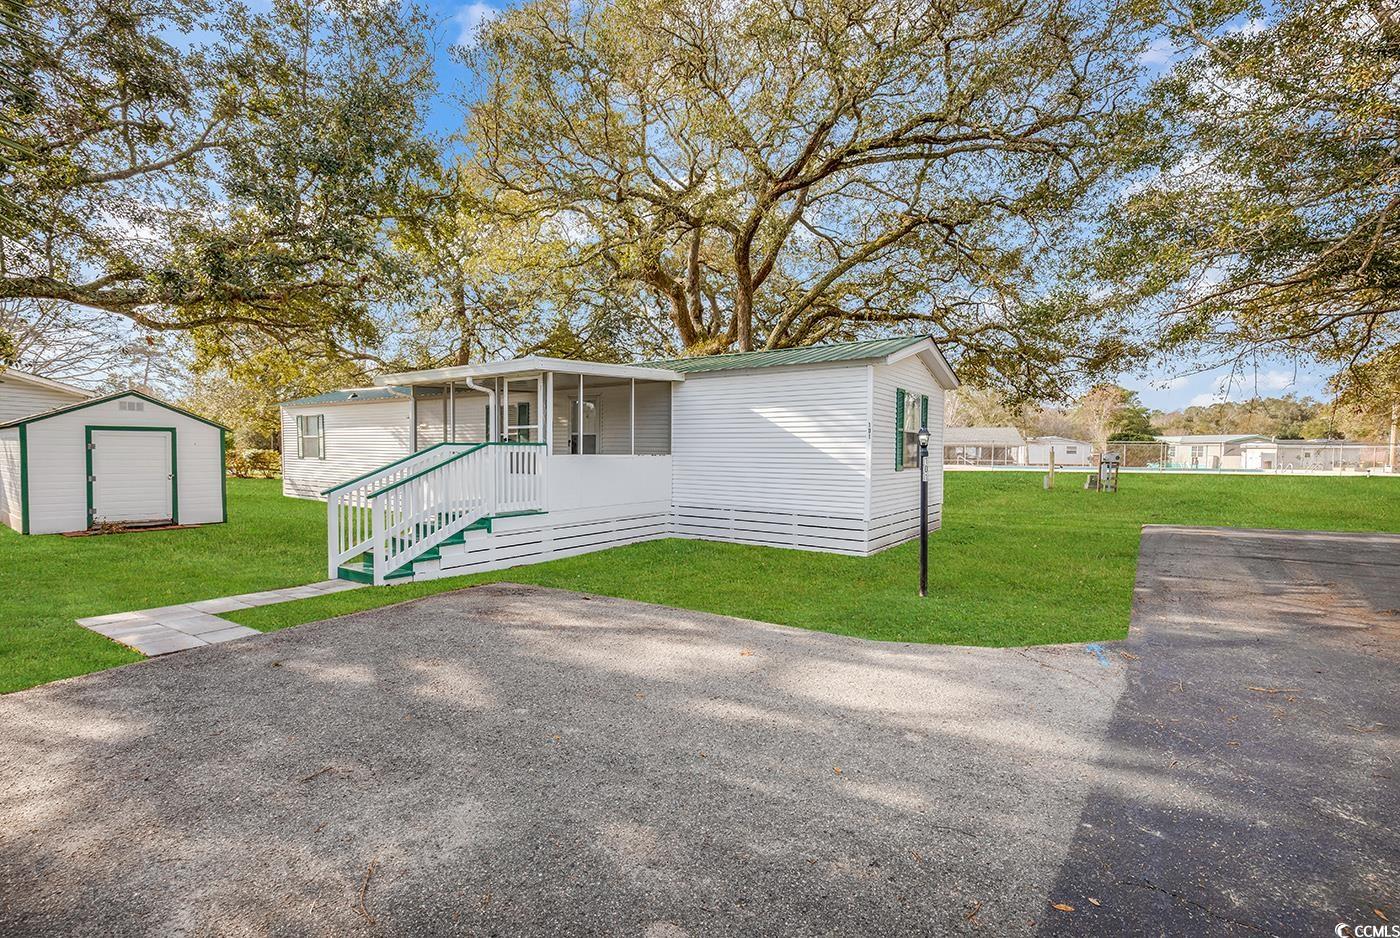 here is your opportunity to vacation or live in this beautiful, totally renovated 2-bedroom 2-bath home located in the 55+ inlet oaks village community and only 1½ miles to the beach! all you need to do is move your furniture in and unpack. this lovely, immaculate home offers a newer a/c unit along with a metal roof. there is a spacious 2-car driveway to park your vehicles. walk up the few steps to the 12’ x 10’ screened in porch, where you will want to enjoy your morning tea/coffee or evening drink of choice. as you open the new front door, you will immediately appreciate the large open kitchen, dining, and family room. there are new low-profile led ceiling lights and new plantation blinds throughout the entire home. the kitchen has been completely updated with new stainless-steel appliances (fridge, range, dishwasher, microwave), plenty of charming white cabinets that offers a large amount of storage, new wide counter-tops and all new vinyl flooring throughout the entire home. family room has a beautiful credenza with an electric fireplace and a tv-wall mount directly above. walk towards the back of the home and you will see the new ge washer & dryer set. above the washer & dryer are overhead cabinets to store your laundry supplies. further down, the master bedroom has a lighted walk-in closet and an ensuite master bathroom with a garden tub. the second bedroom and full guest bathroom are in the front of the home. both bathrooms have new toilets, vanities, medicine cabinets, and over-the-toilet storage cabinets. flip the light switches two times to dim the lights for a softer atmosphere. outside you have a large wooden 12’ x 10’ shed with all new flooring, shelving, electrical outlets, and overhead lighting. in the shed is a new self-propelled lawn mower and weed wacker that will convey with the sale! the home is located at the end of the street and positioned on a shady lot for your added comfort. best of all, it is also located near the community swimming pool! home is being sold as is. inlet oaks village is a friendly 55+ community that offers many weekly activities and holiday parties at the clubhouse. there is a large 9 ft. deep swimming pool where the residents gather in the mornings for water aerobics. directly across from the park is a paved walk/bike path that will take you directly to huntington beach state park and beyond! all this is located directly next door to brookgreen botanical gardens and close to the famous marsh walk, shopping, dining and so much more!